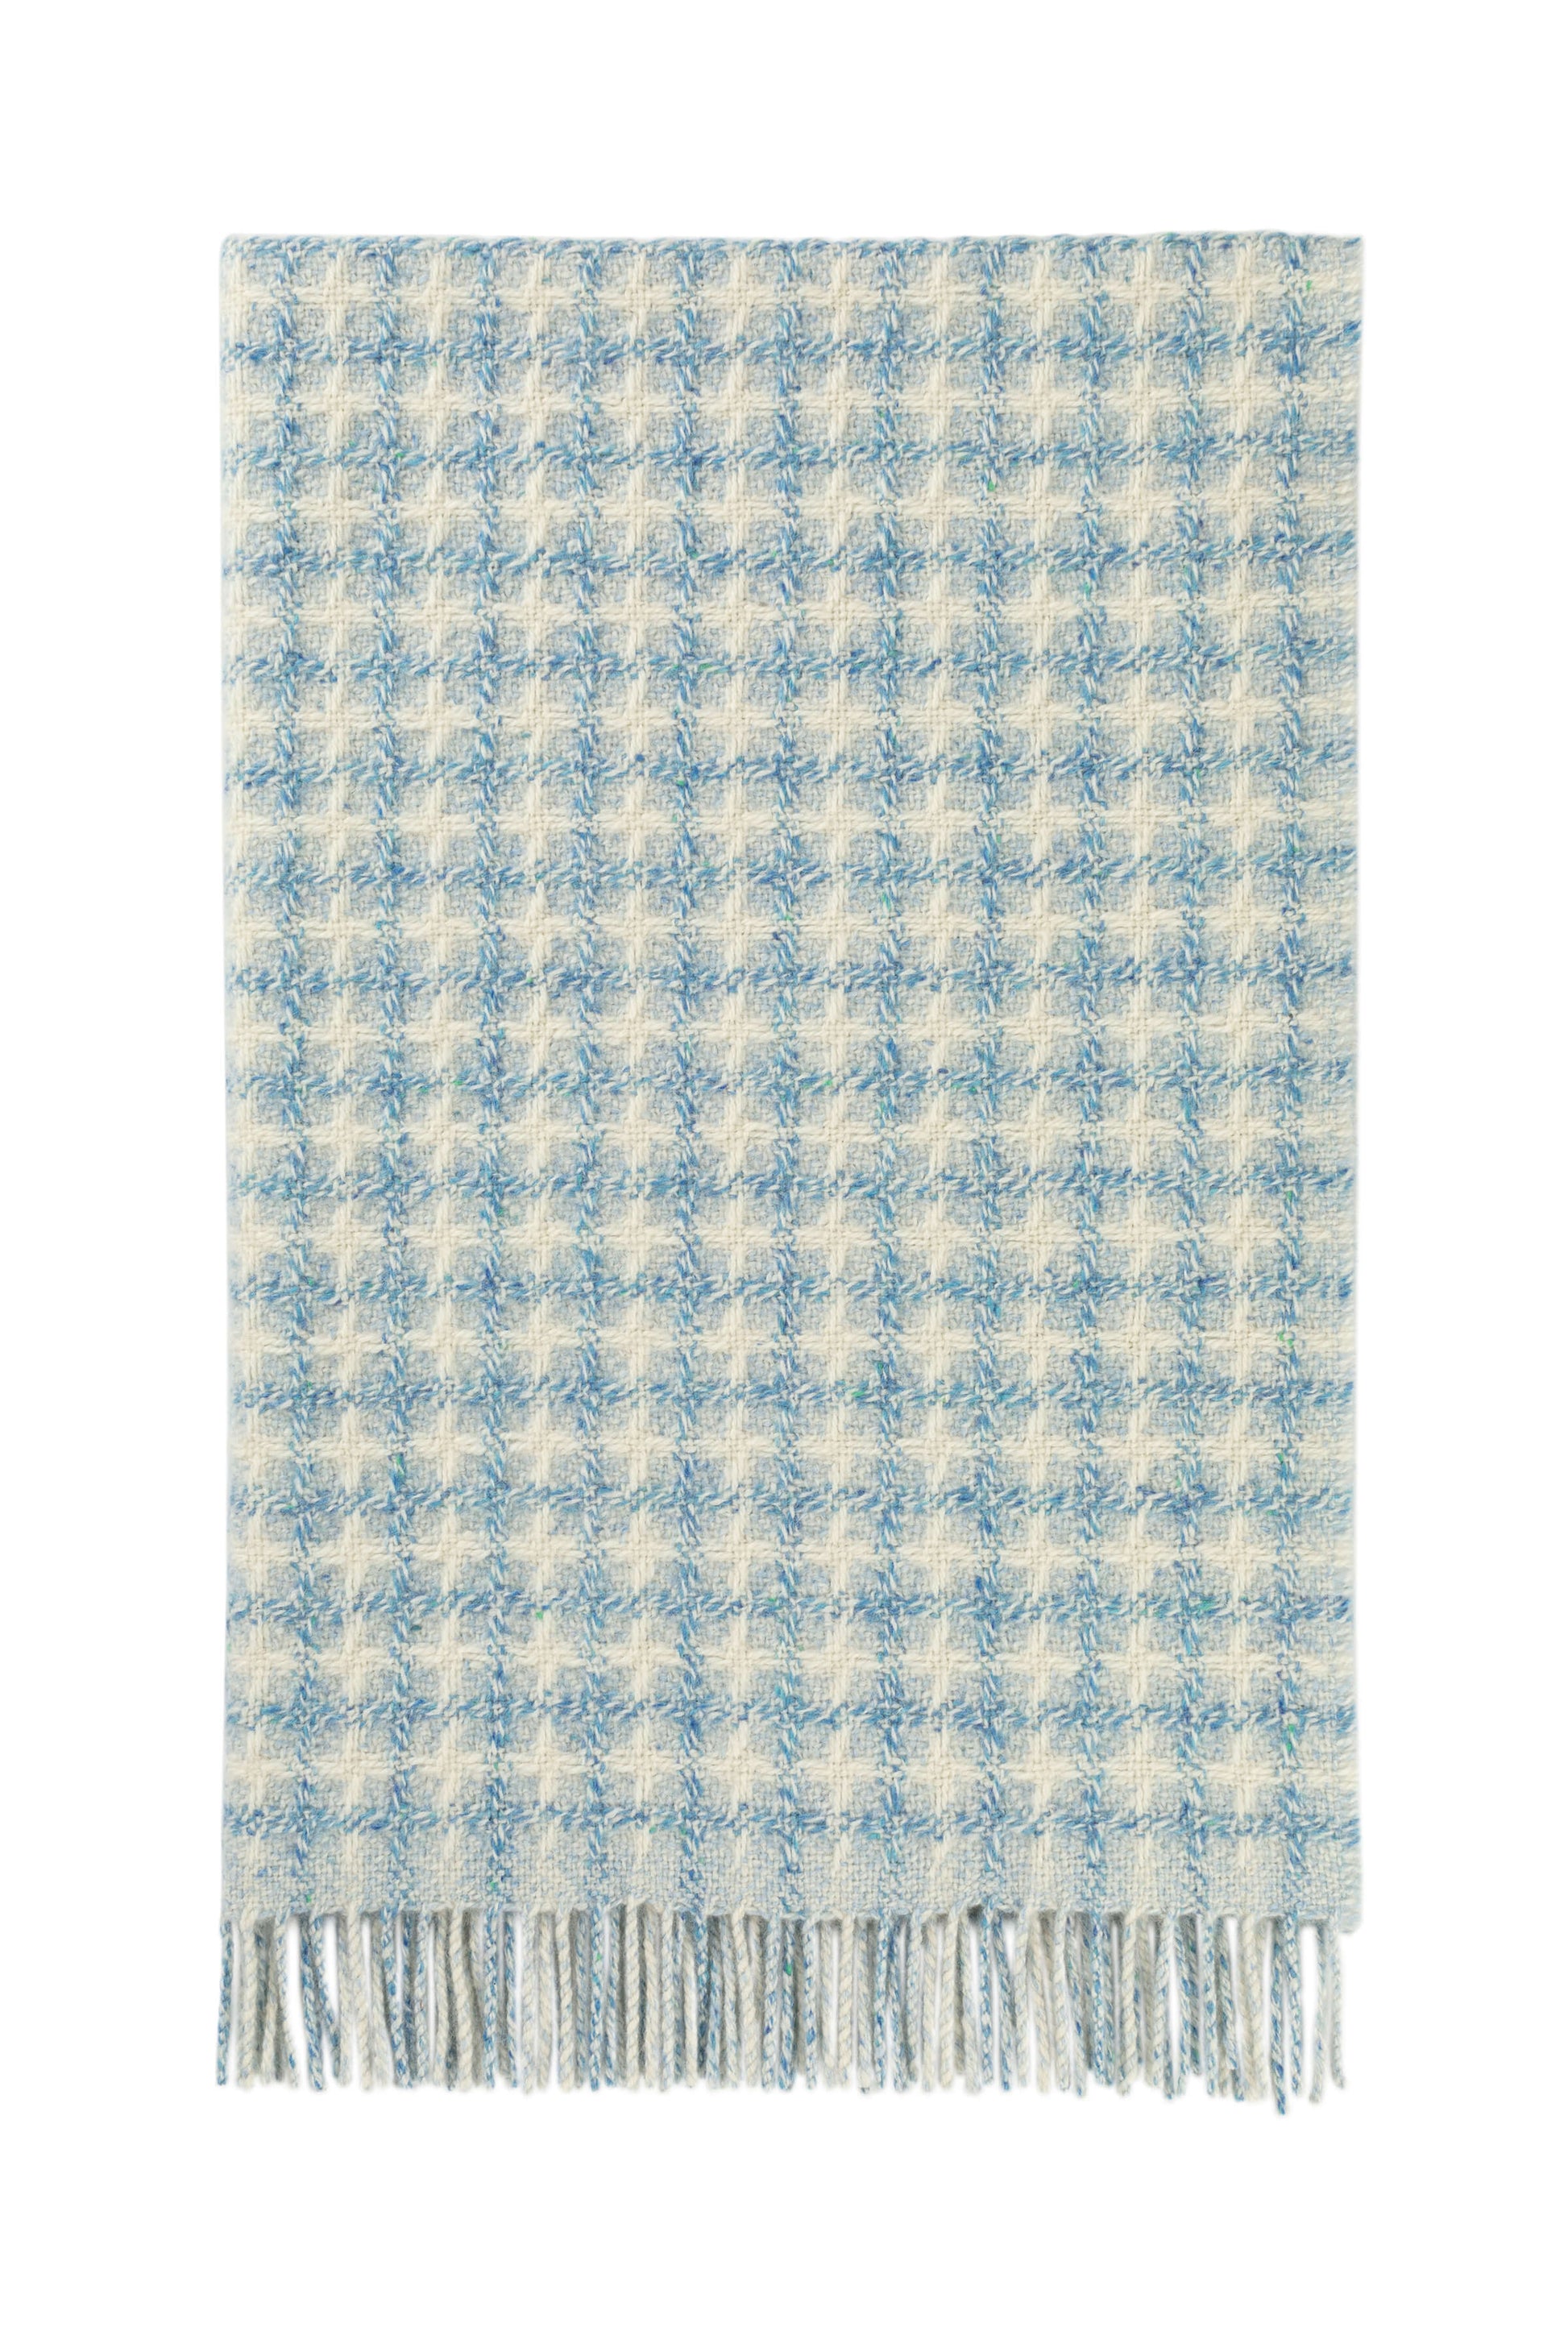 Johnstons of Elgin 2024 Baby Blanket Collection Blue Donegal Cashmere Baby Blanket WA001955RU7540ONE